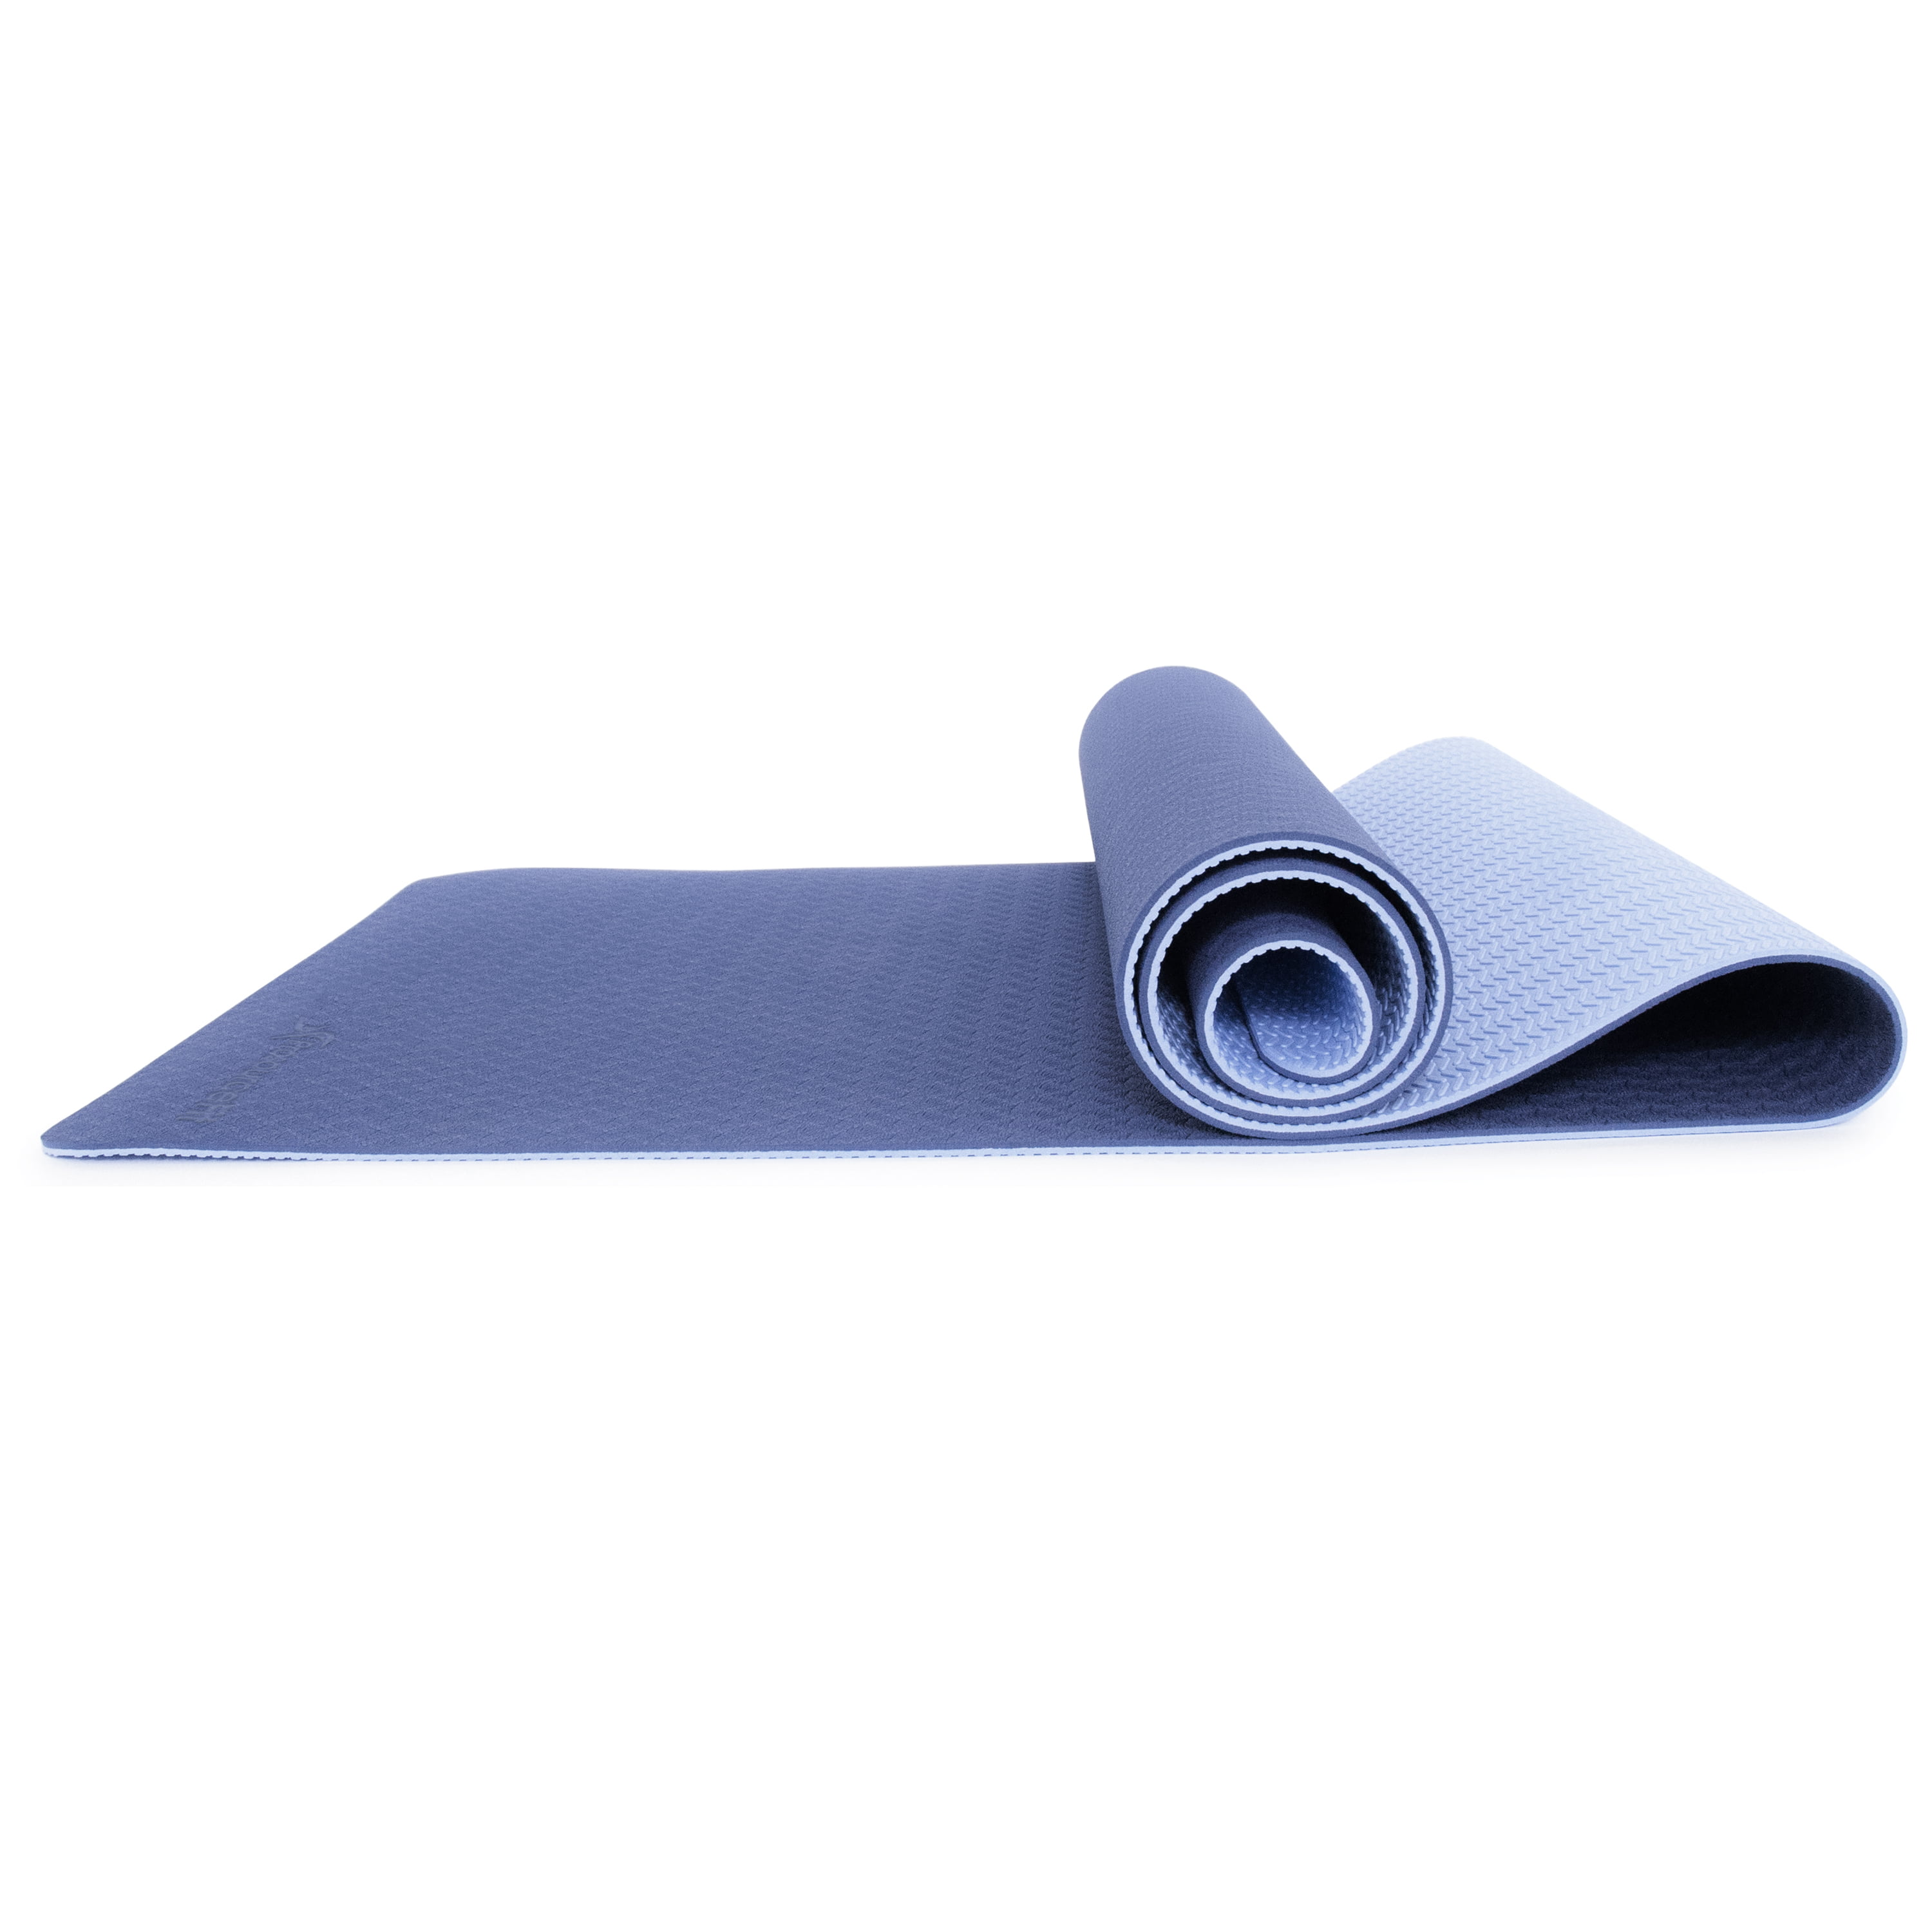 Eco-friendly TPE yoga mat's Thick Exercise Fitness Physio Pilates Gym Mats 